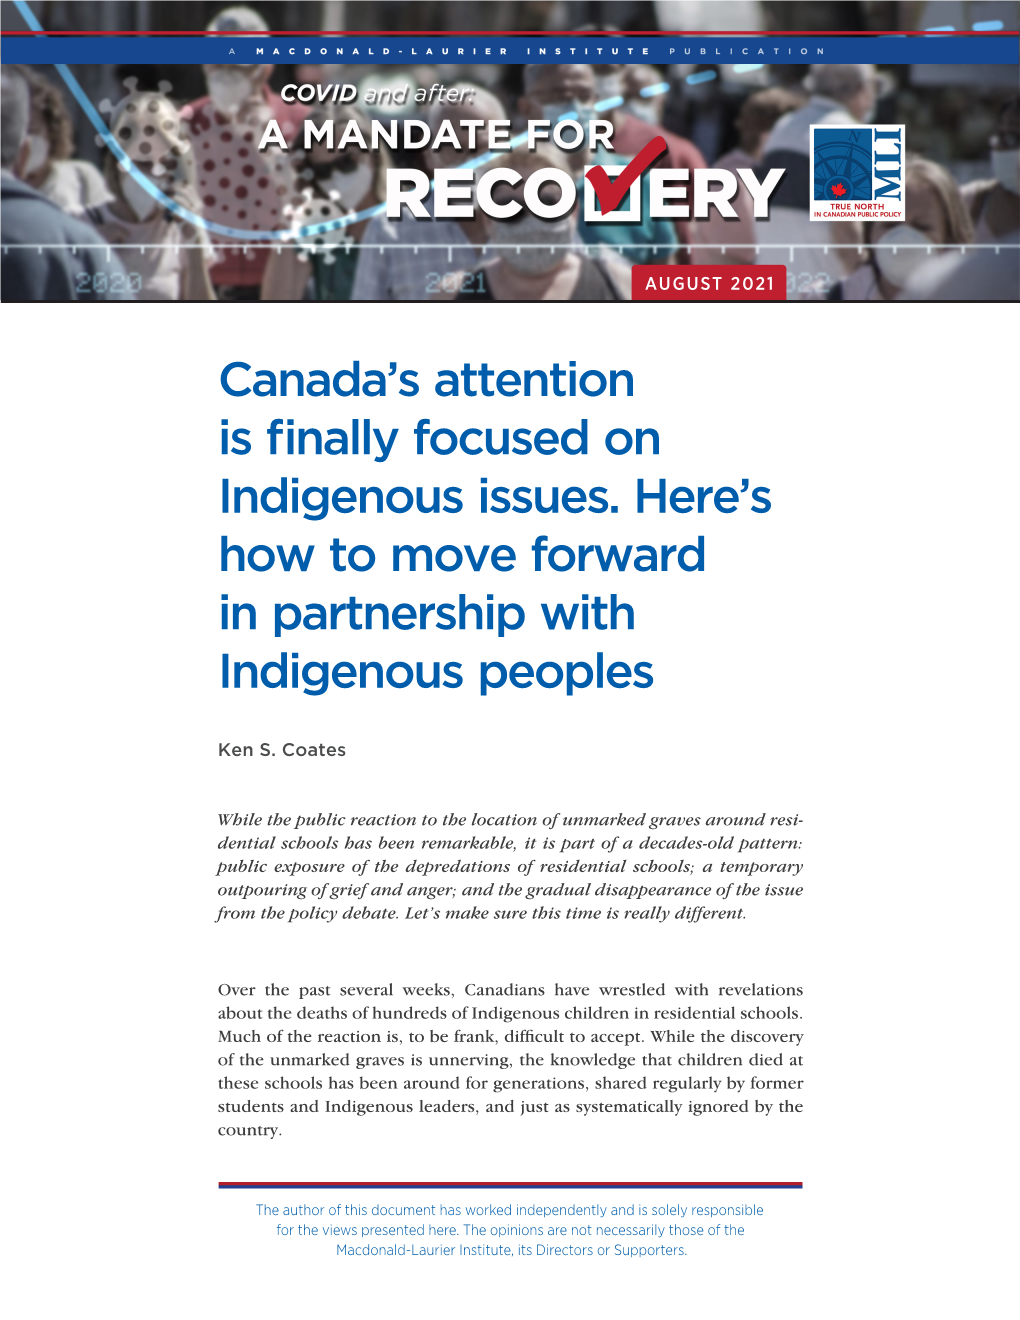 Canada's Attention Is Finally Focused on Indigenous Issues. Here's How to Move Forward in Partnership with Indigenous People